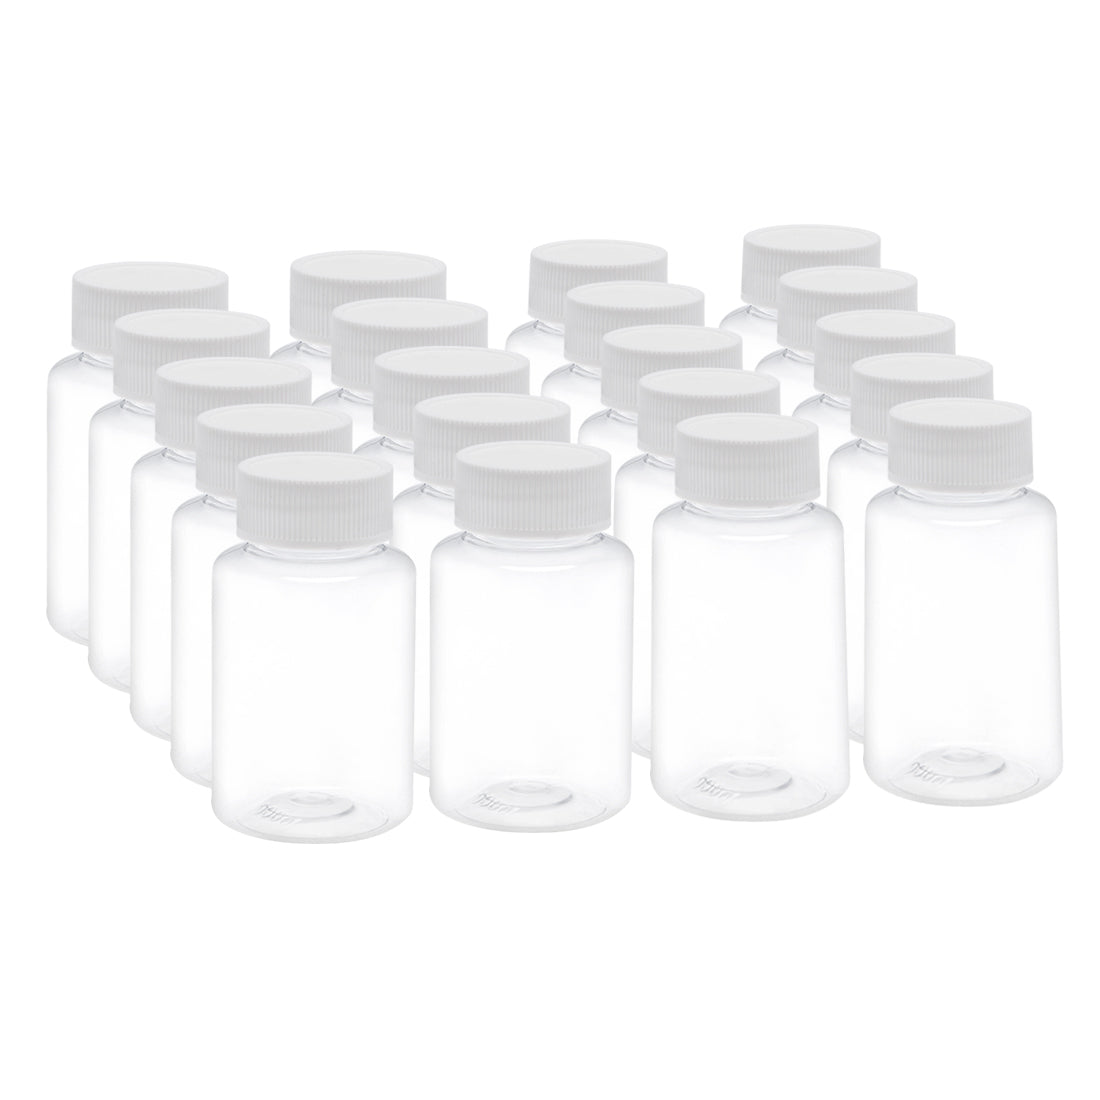 Uxcell Uxcell 3.4 oz/100ml PET Plastic Lab Chemical Reagent Bottle Wide Mouth Liquid/ Solid Storage Container Clear Bottles w Tamper Evident Caps 20pcs